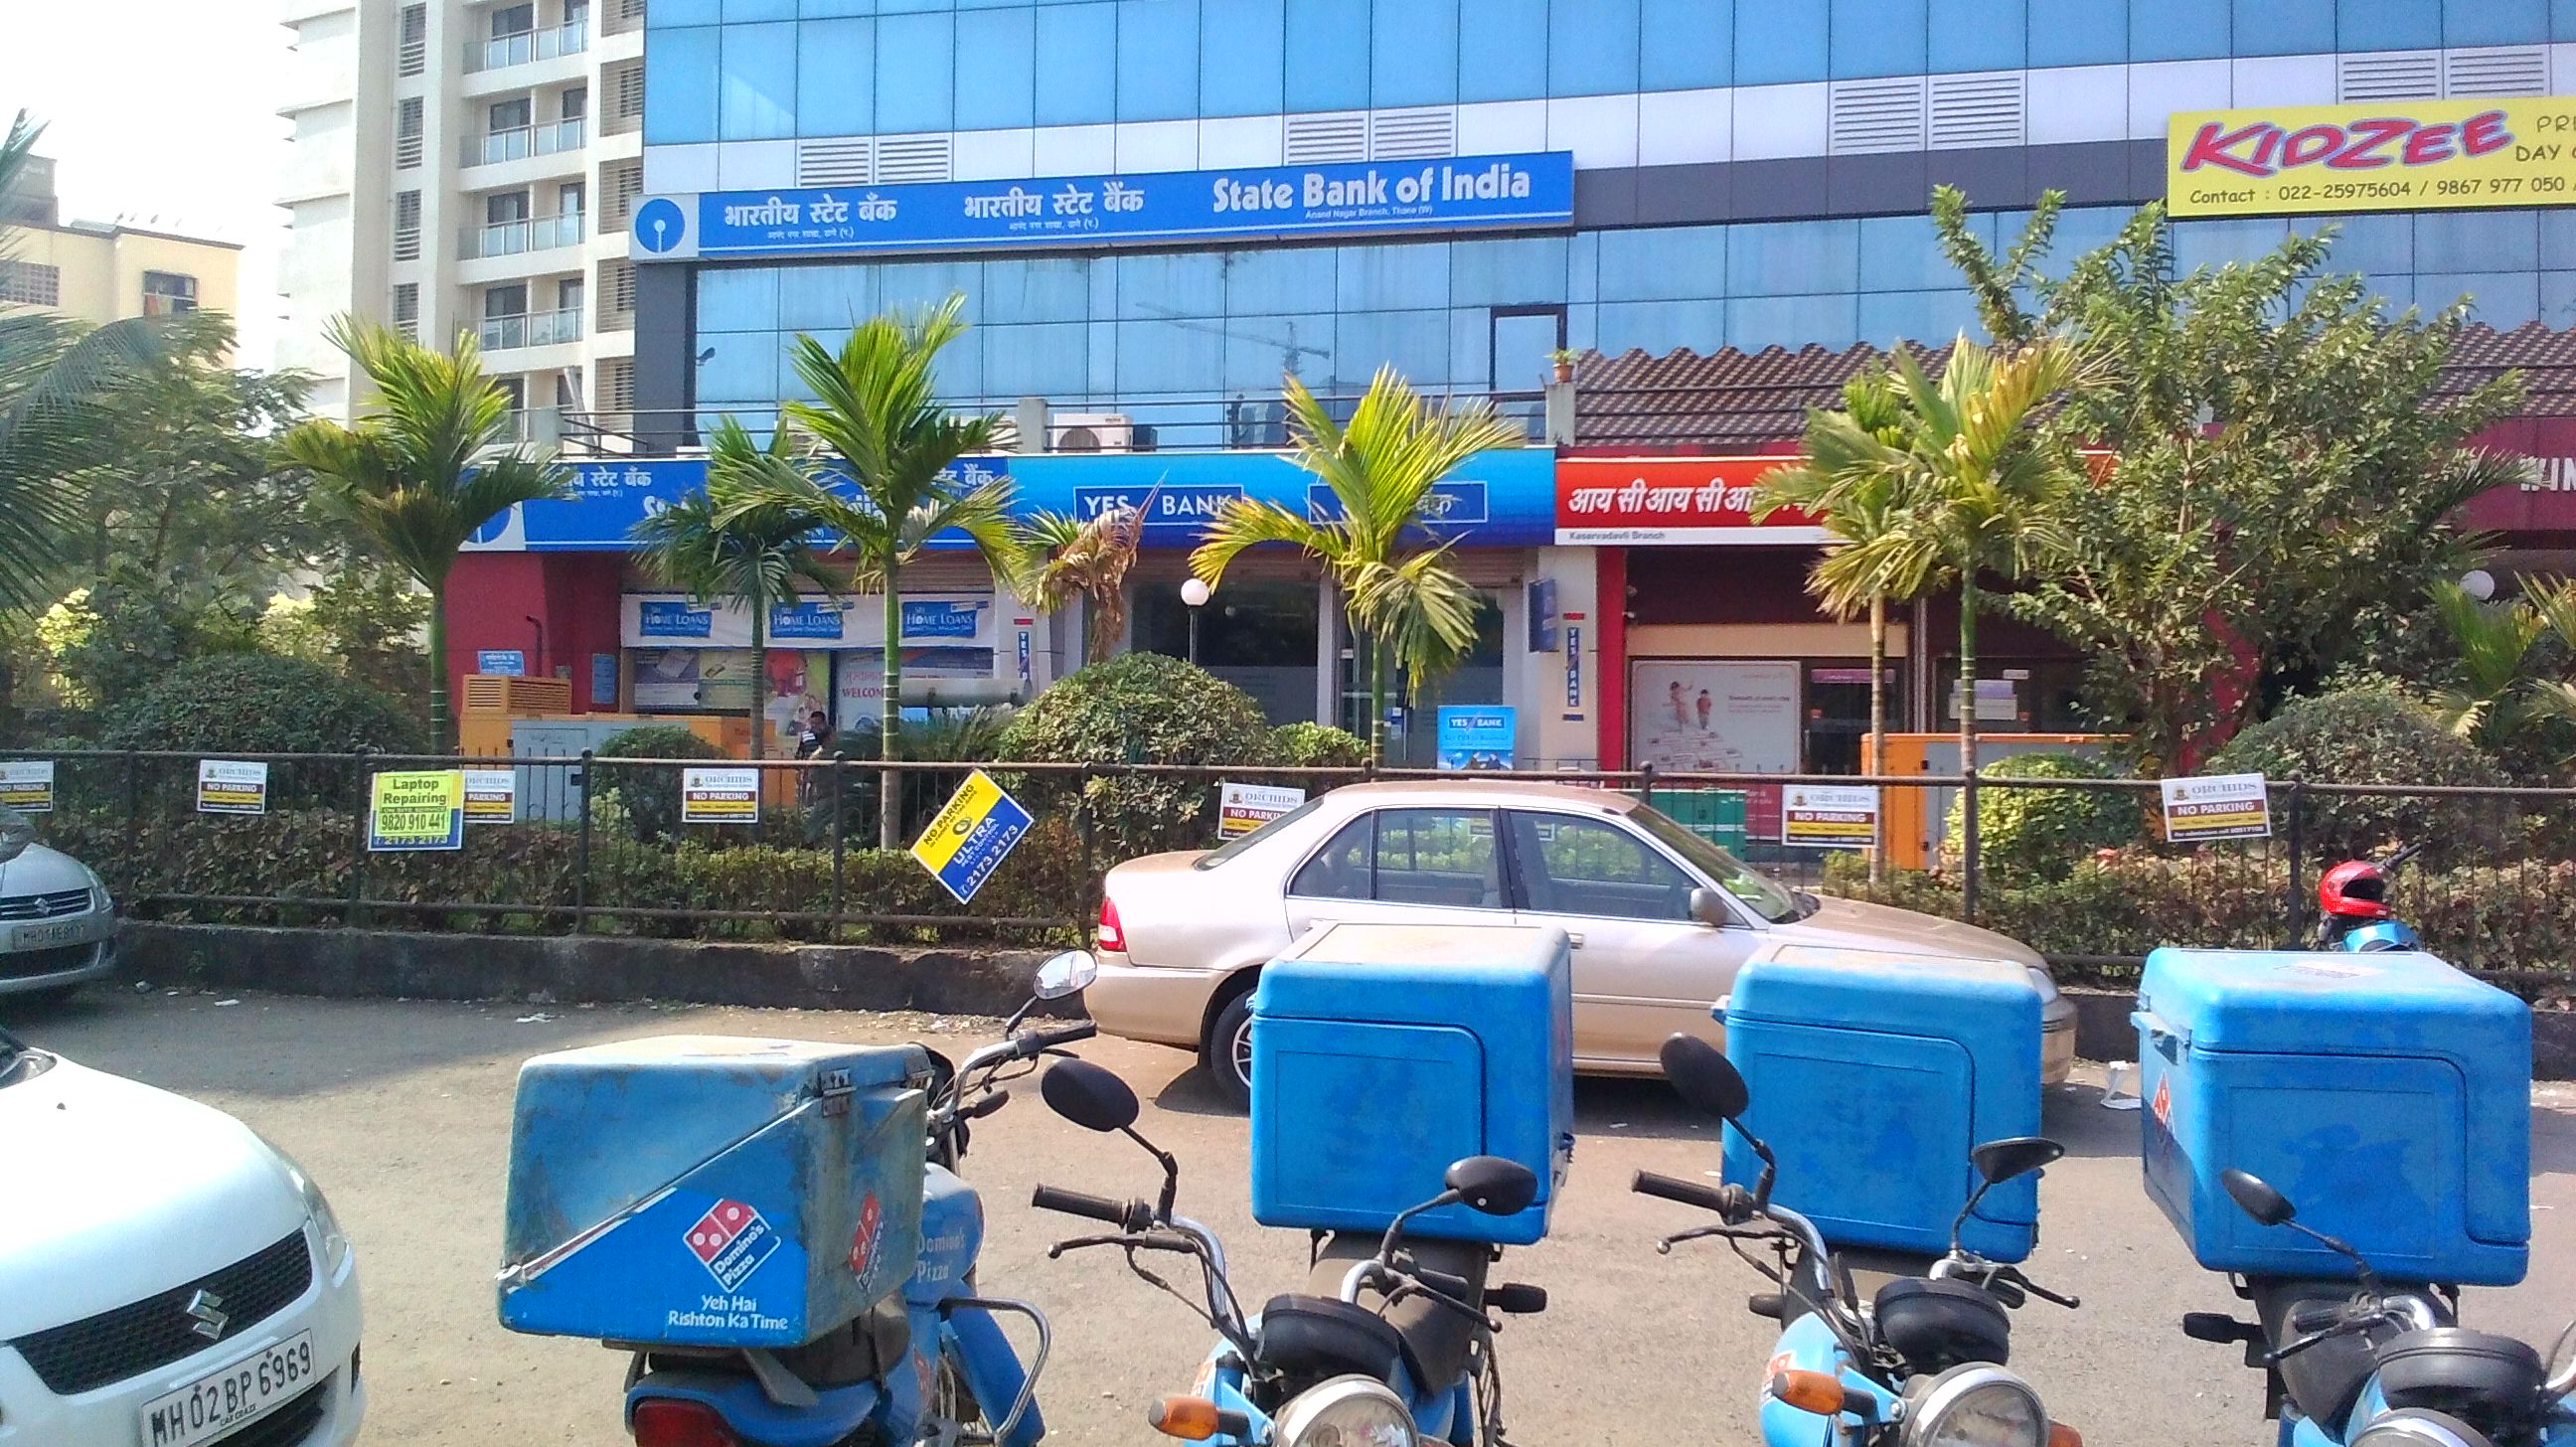 Commercial Shops for Sale in Commercial Shop For Sale in Ghodbunder Road, Opp Hyper city Mall, Thane-West, Mumbai